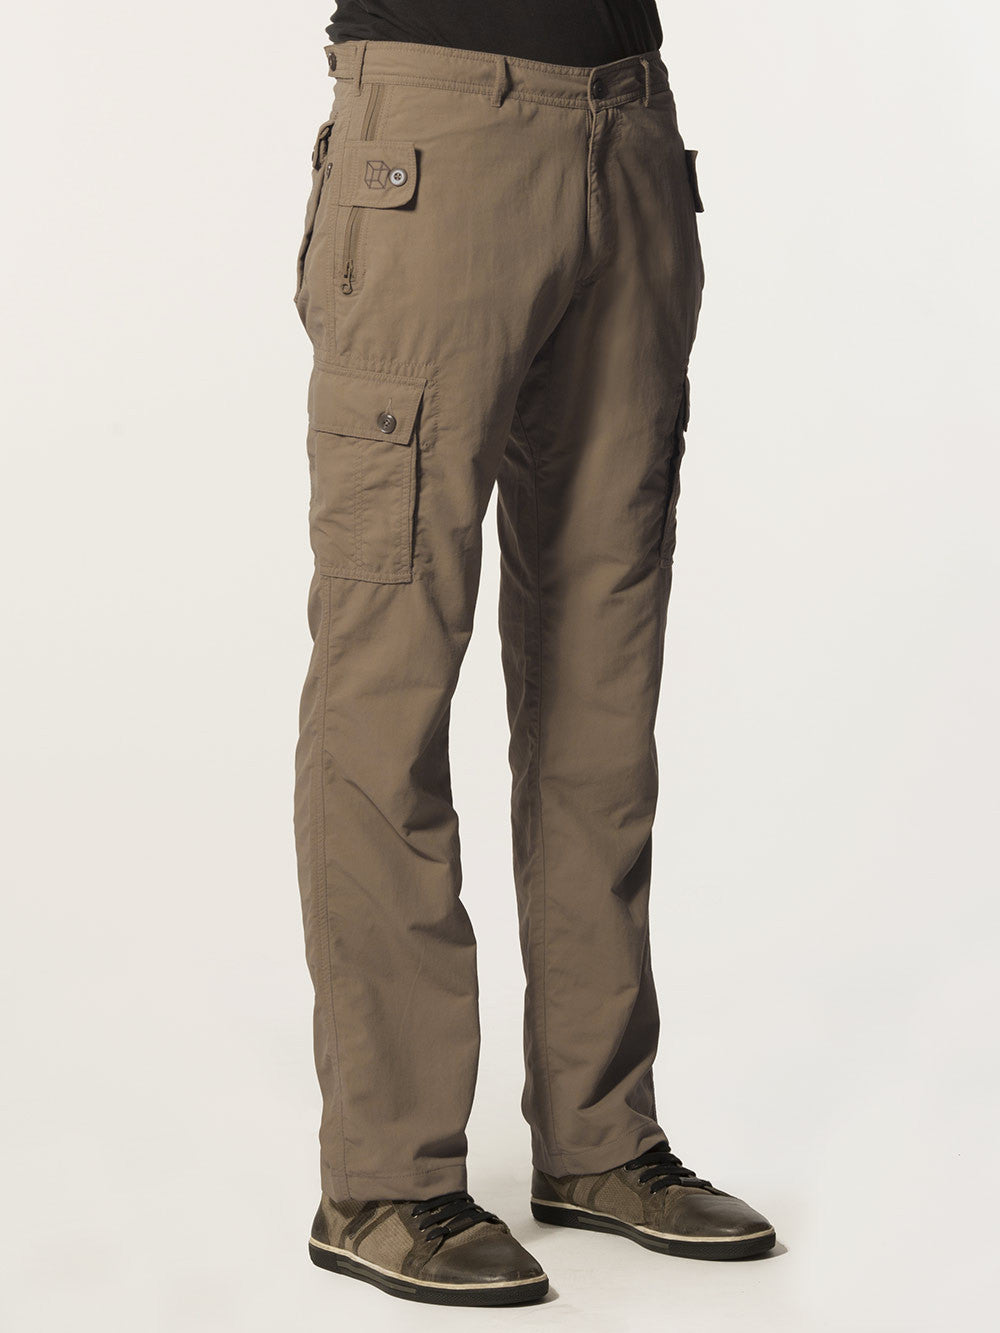 Best women's walking trousers 2021: Flexible, durable and breathable | The  Independent